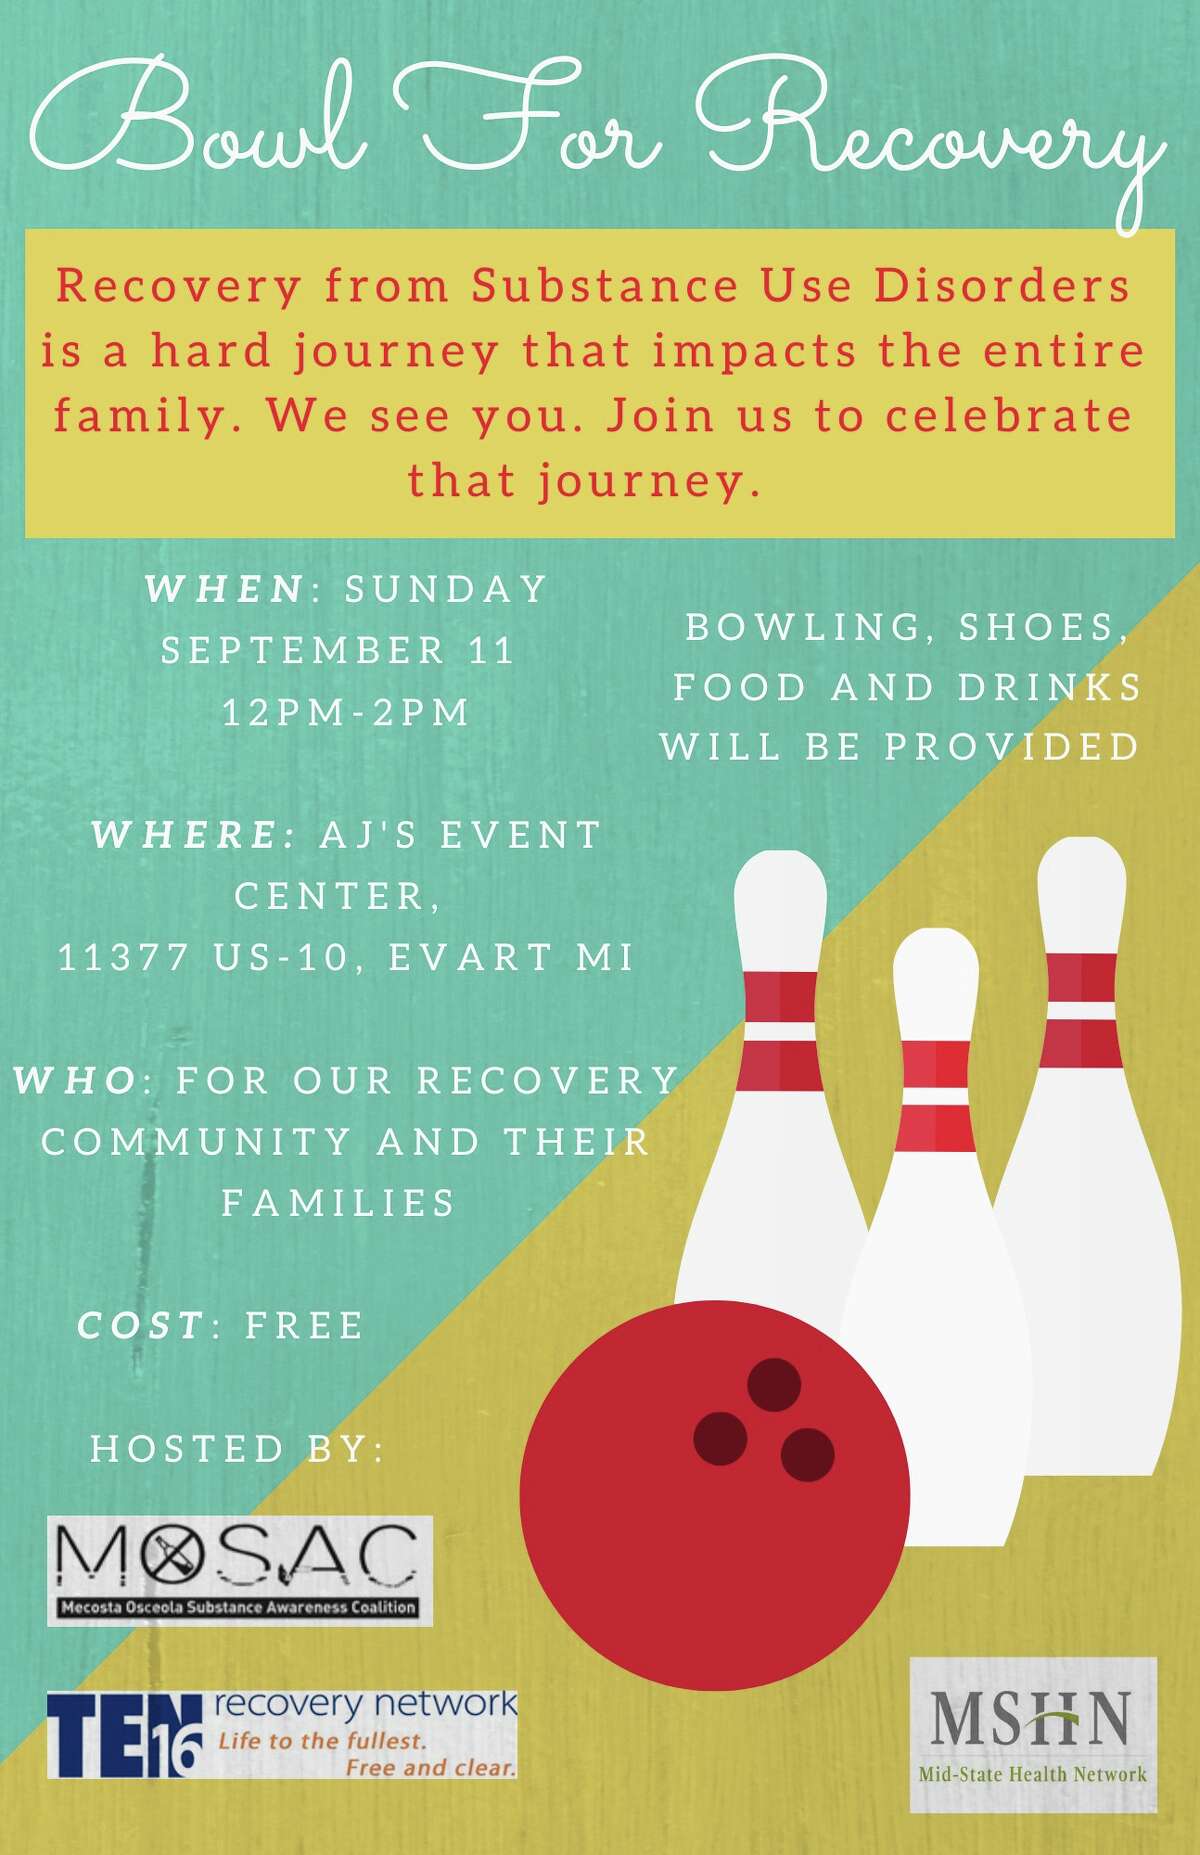 The Mecosta Osceola Substance Abuse Coalition is hosting a free bowling event at AJ's Event Center at noon on Sunday, Sept. 11, to celebrate those in recovery and their families.